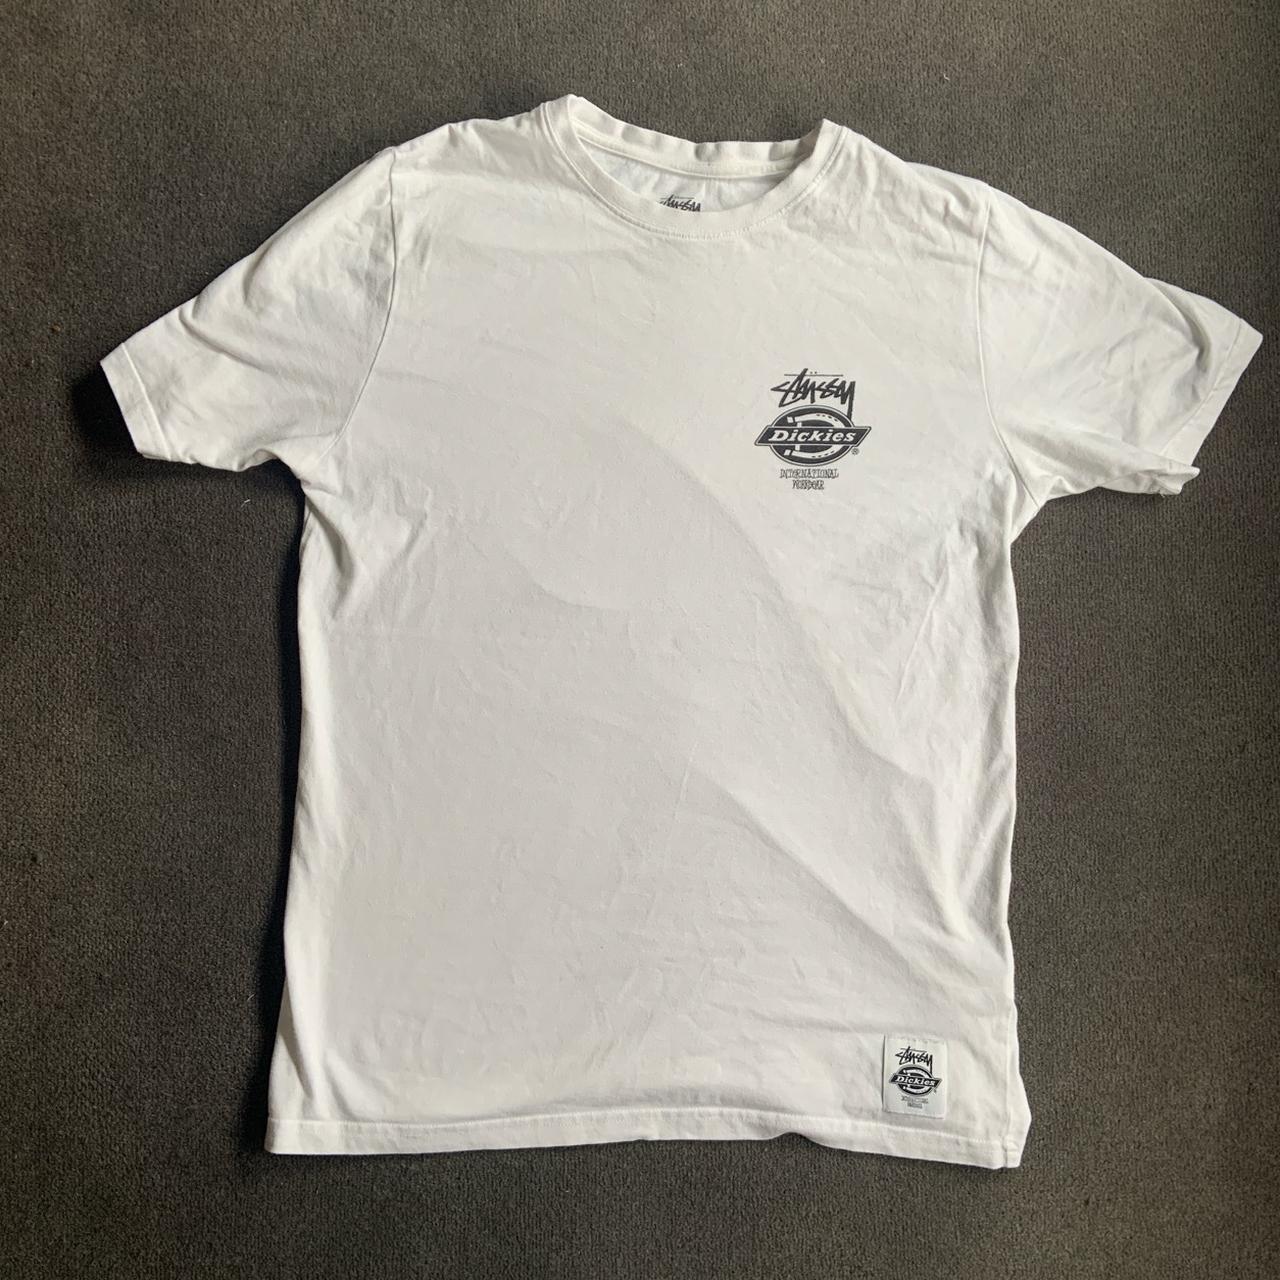 Stussy x Dickies T shirt White Small Barely... - Depop